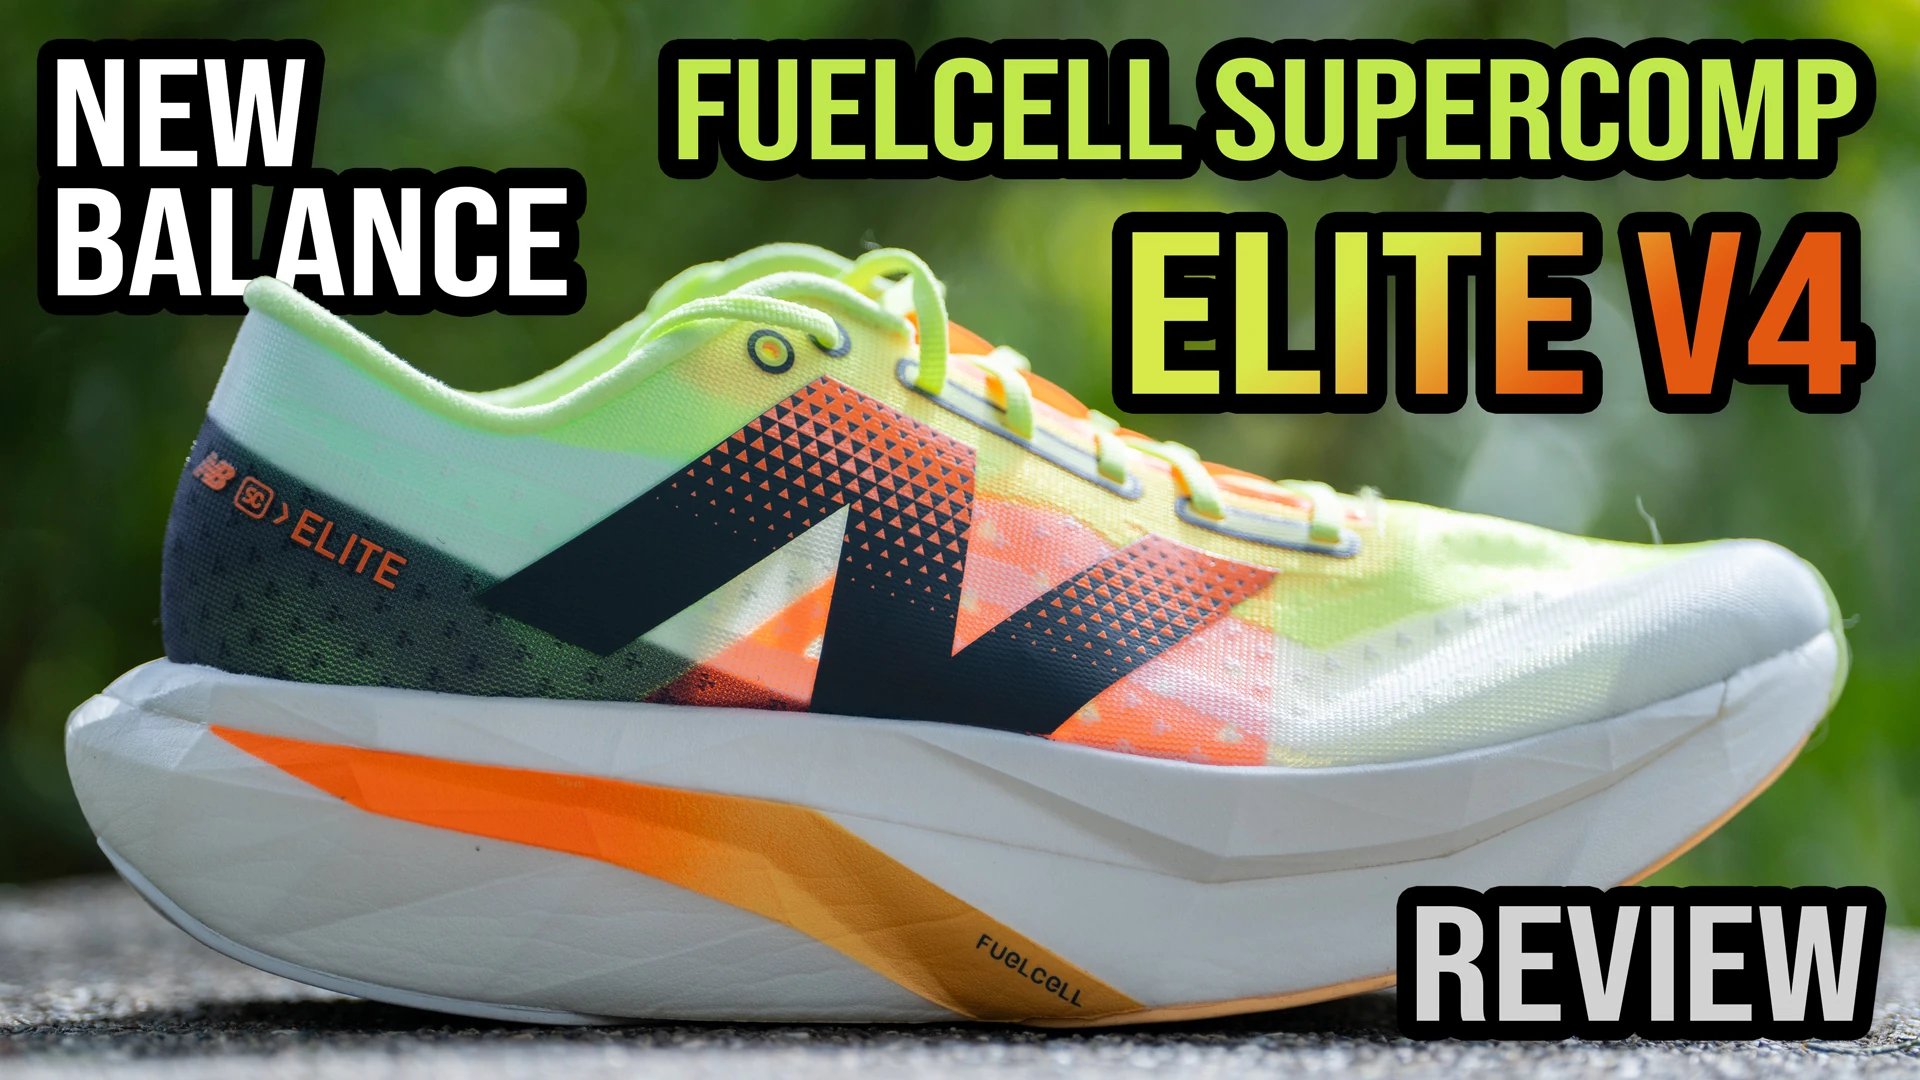 New Balance FuelCell SuperComp Elite V4 Review YOUTUBE